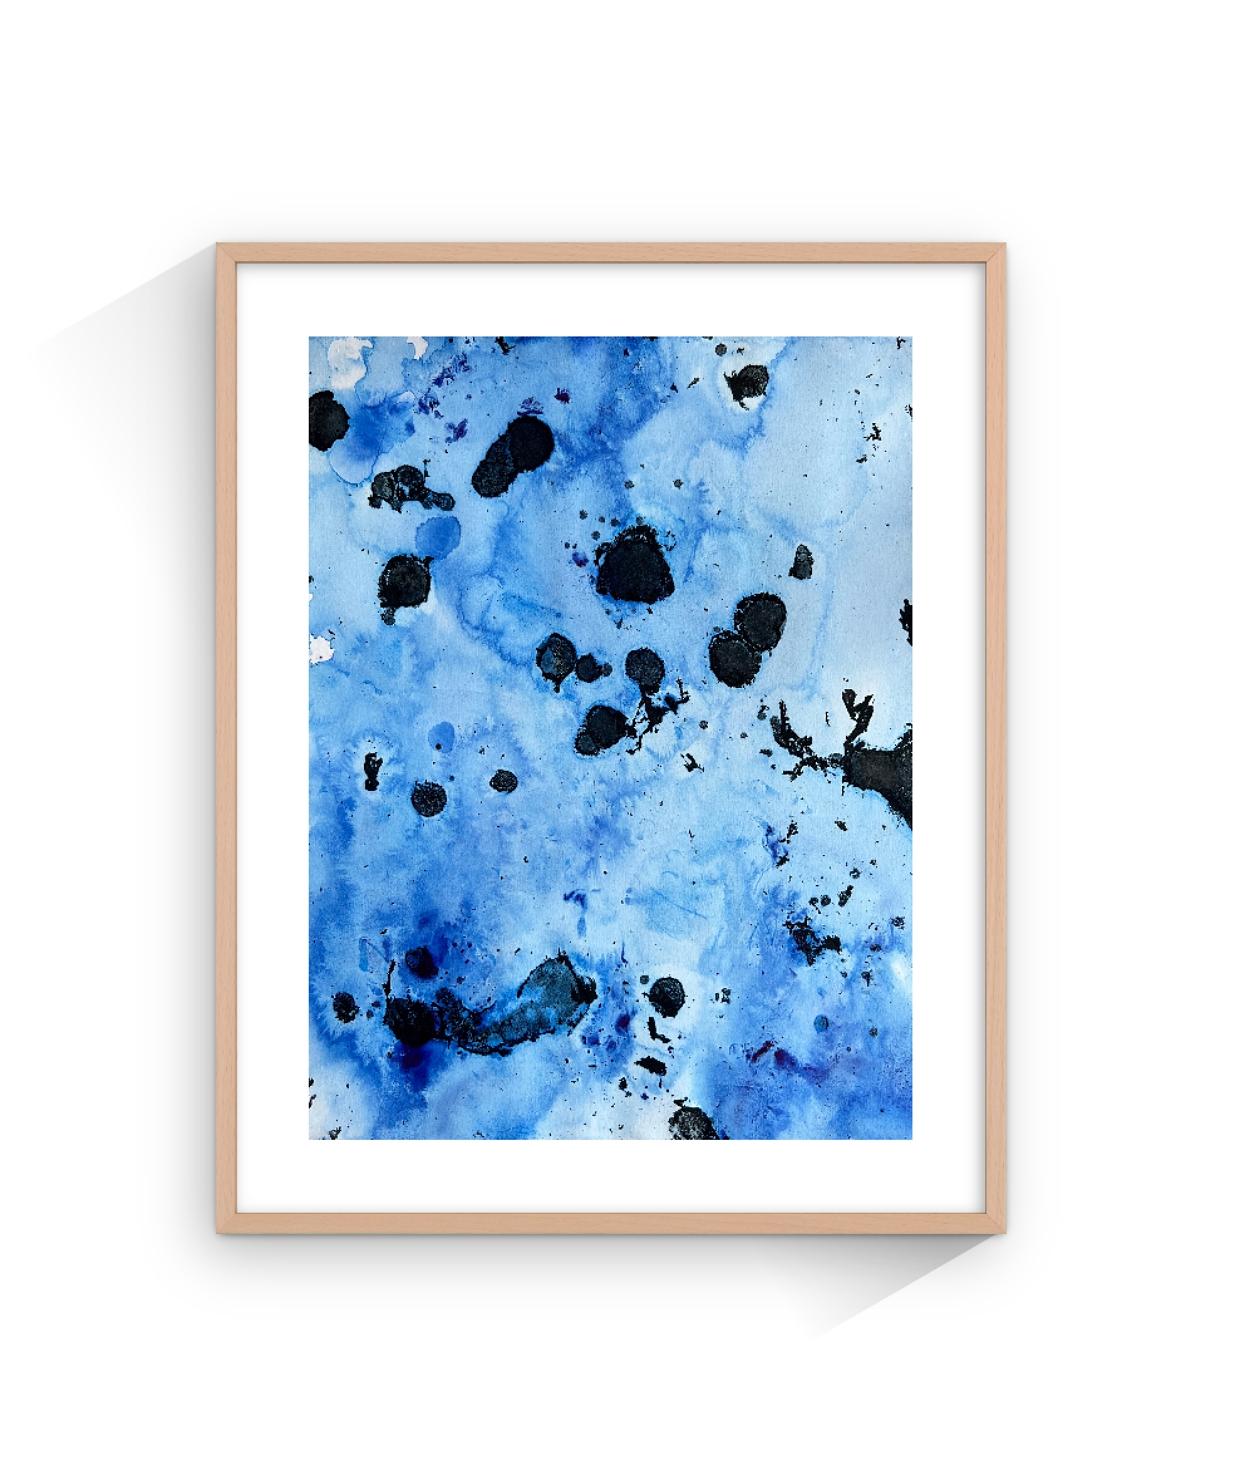 Original ink on Paper, Contemporary Painting, Minimalist Blue Sea - Art by TUSET